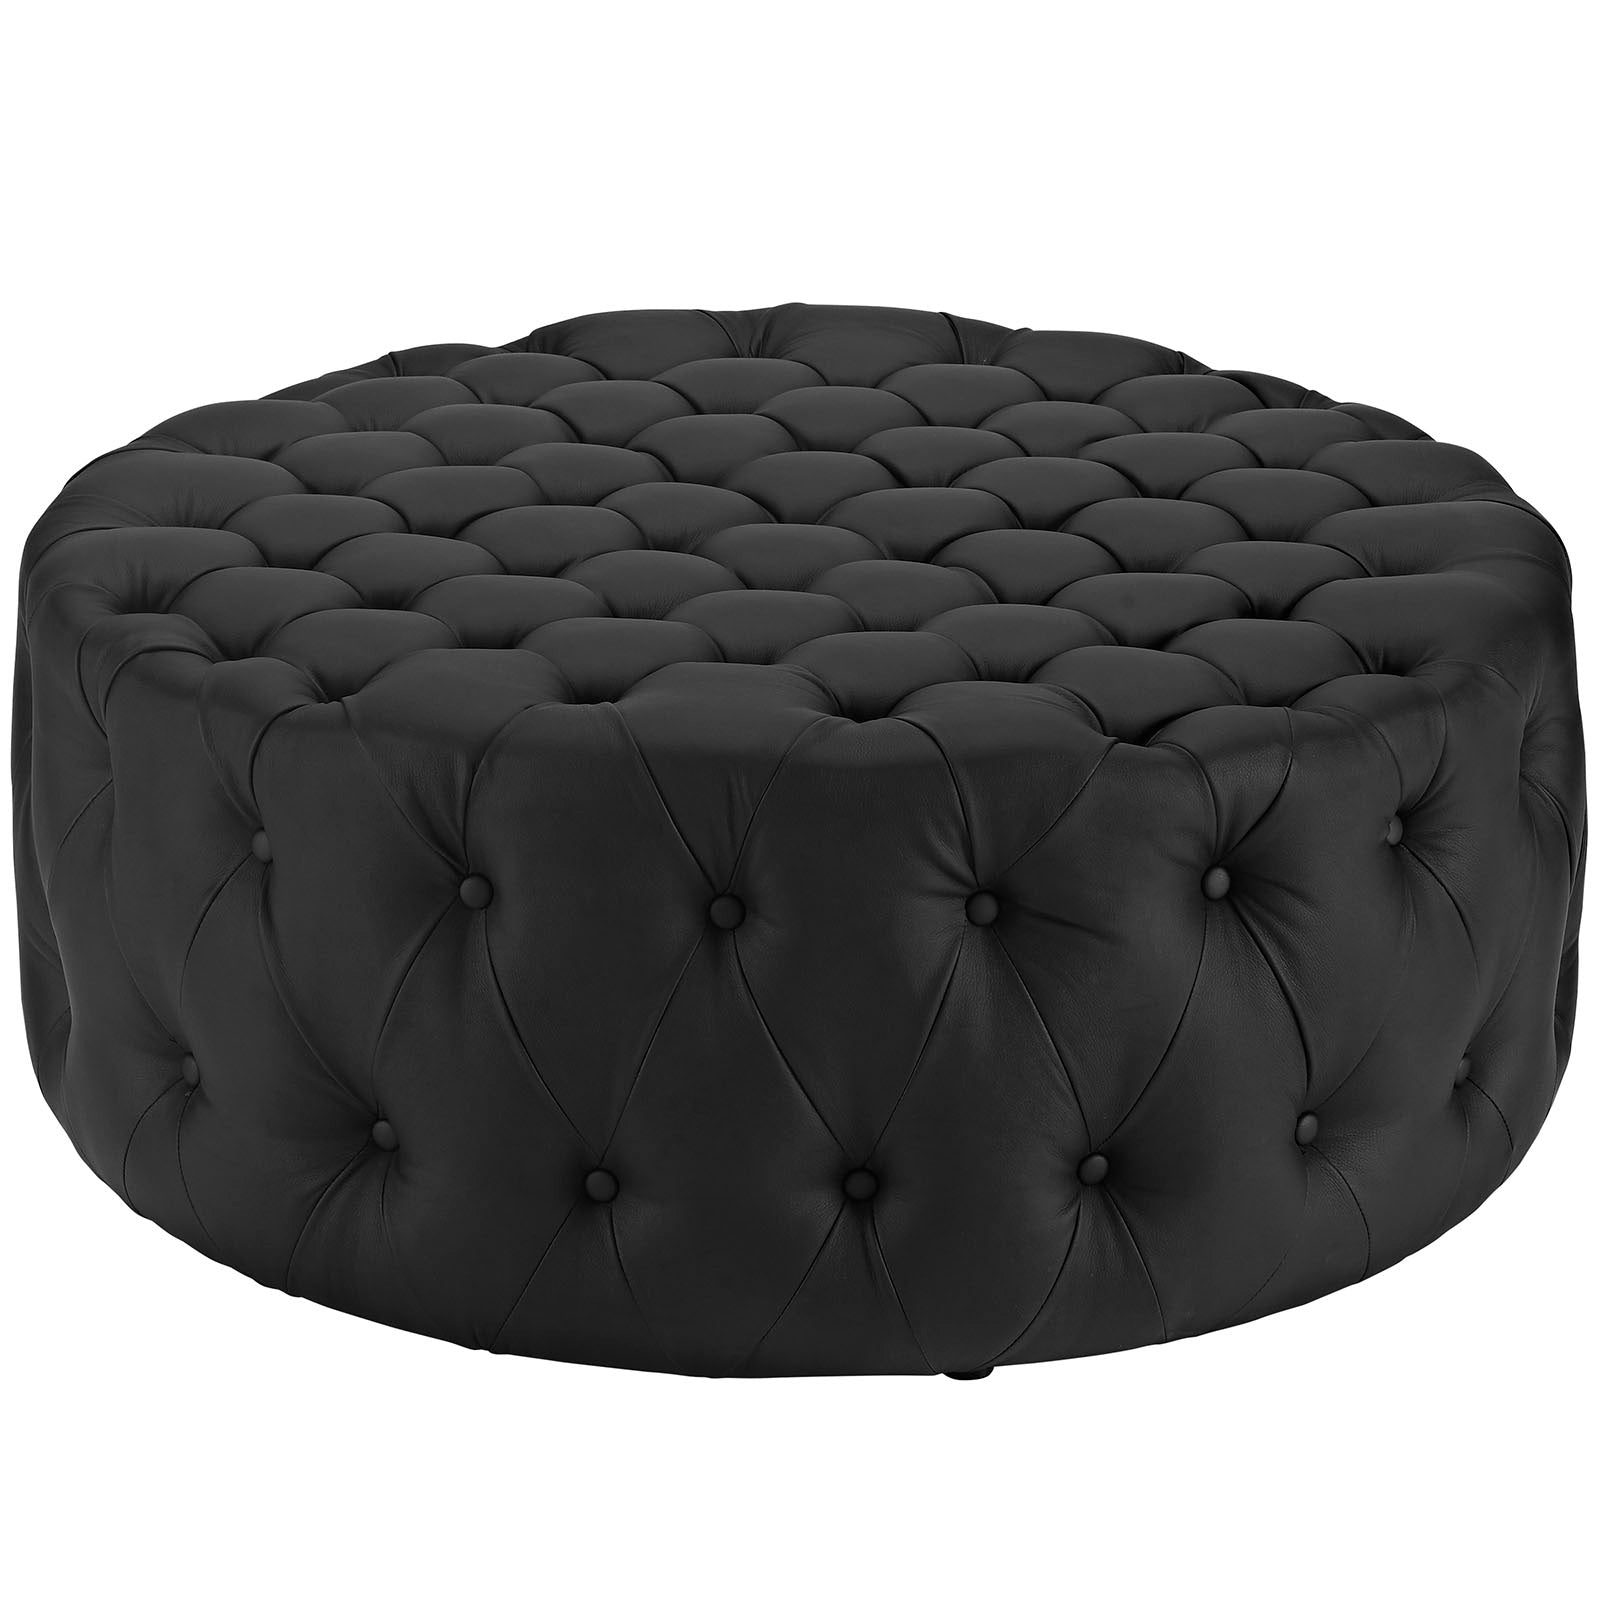 Luxurious  Round Design Amour Upholstered Vinyl Oversized Tufted Button Ottoman - Black